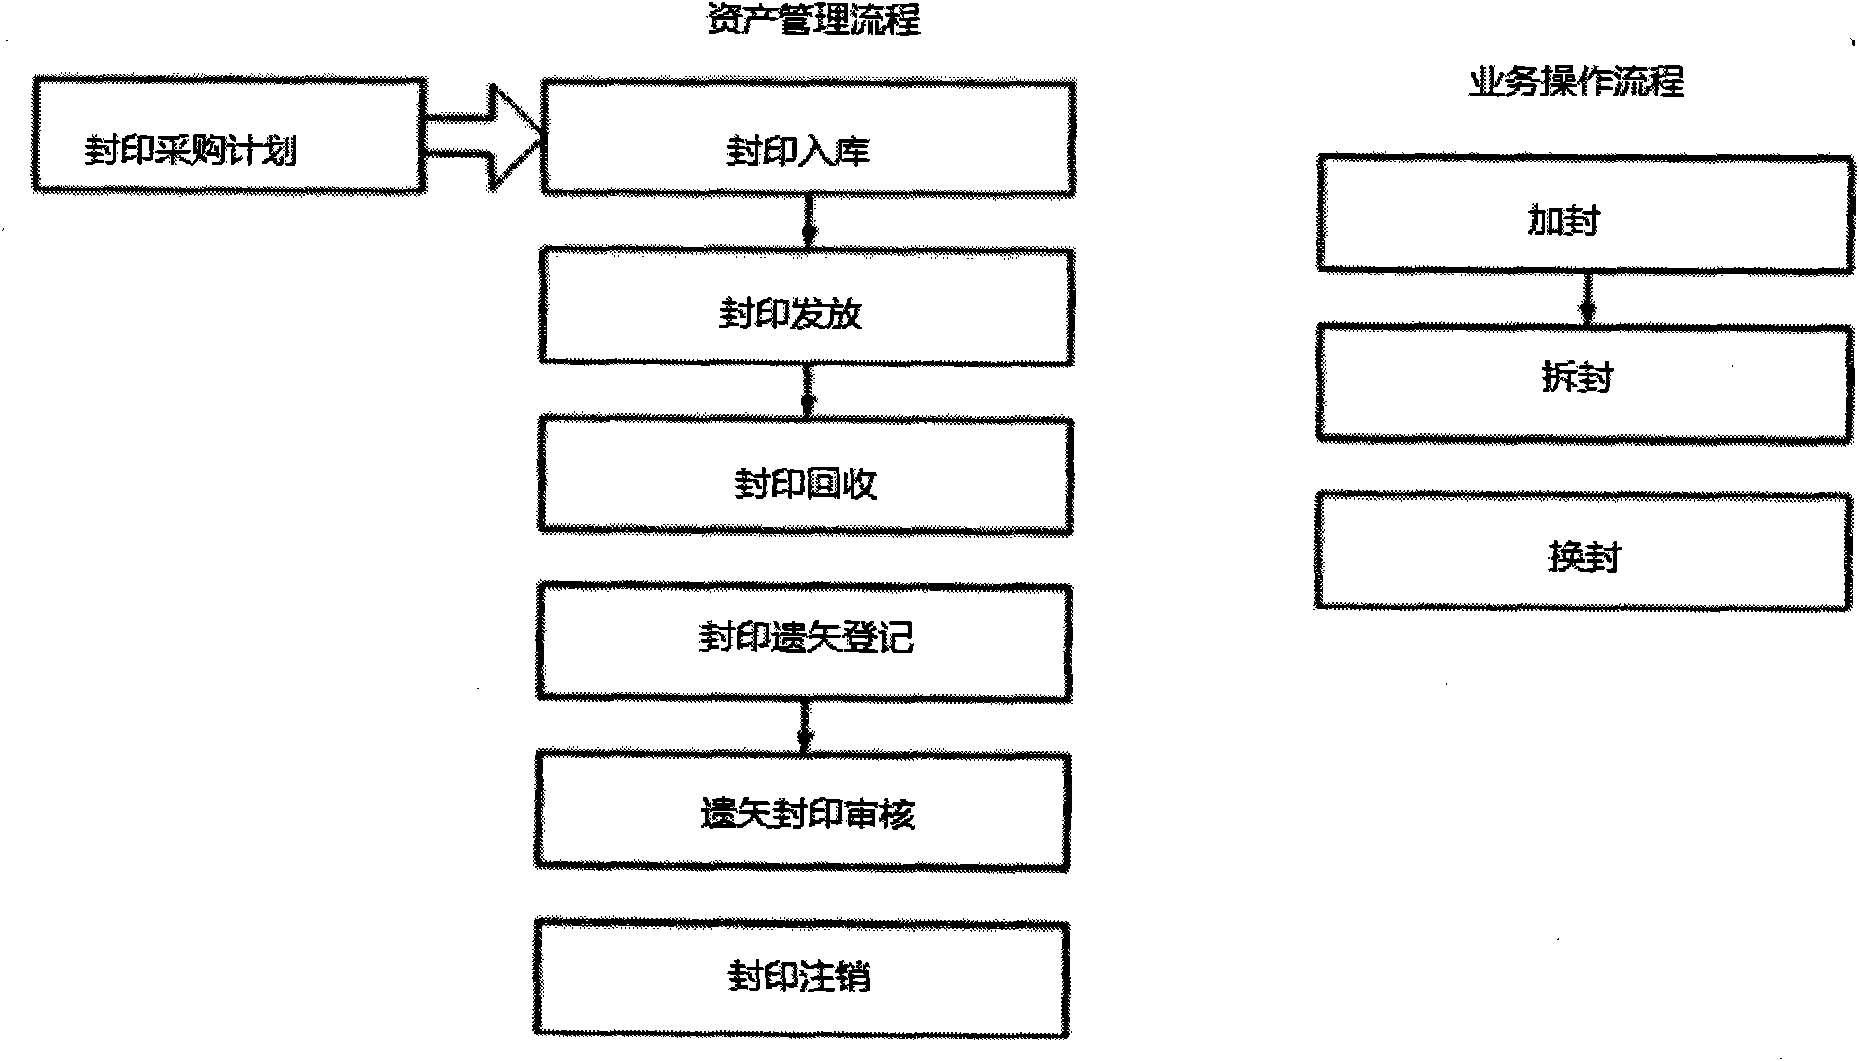 Web-based system and method for managing electric meter seal